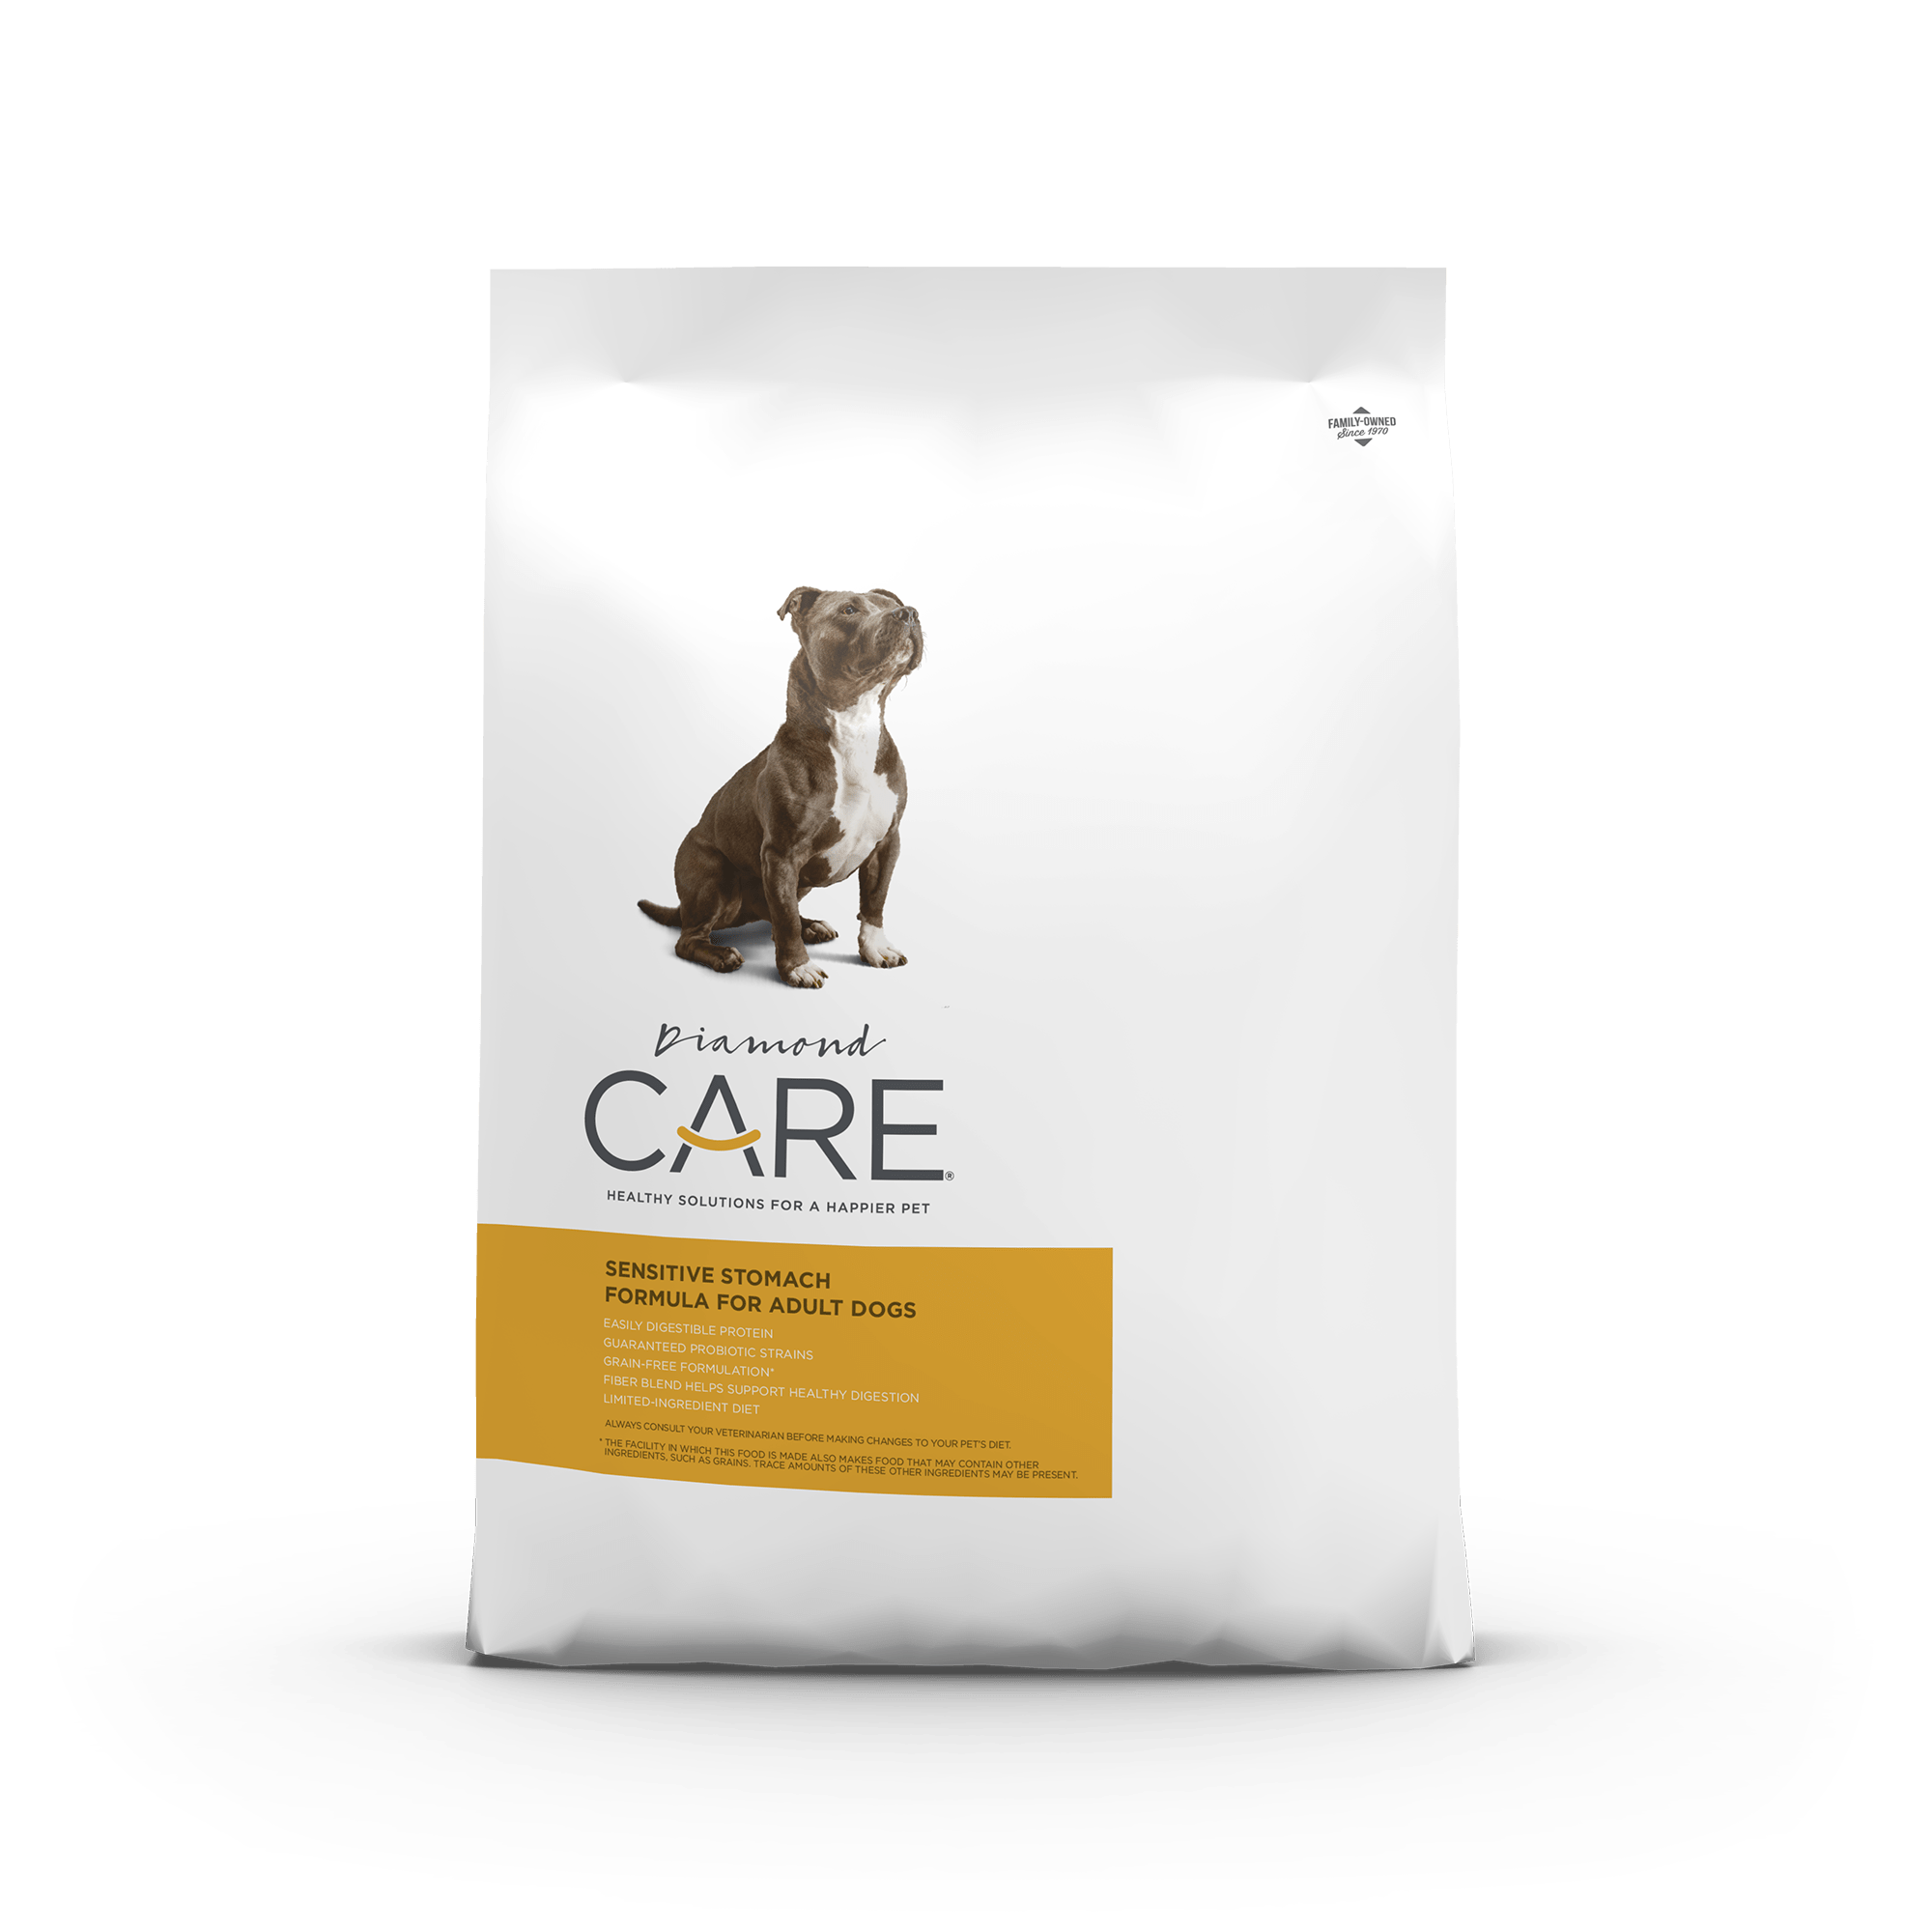 Diamond CARE Sensitive Stomach Formula for Adult Dogs product packaging